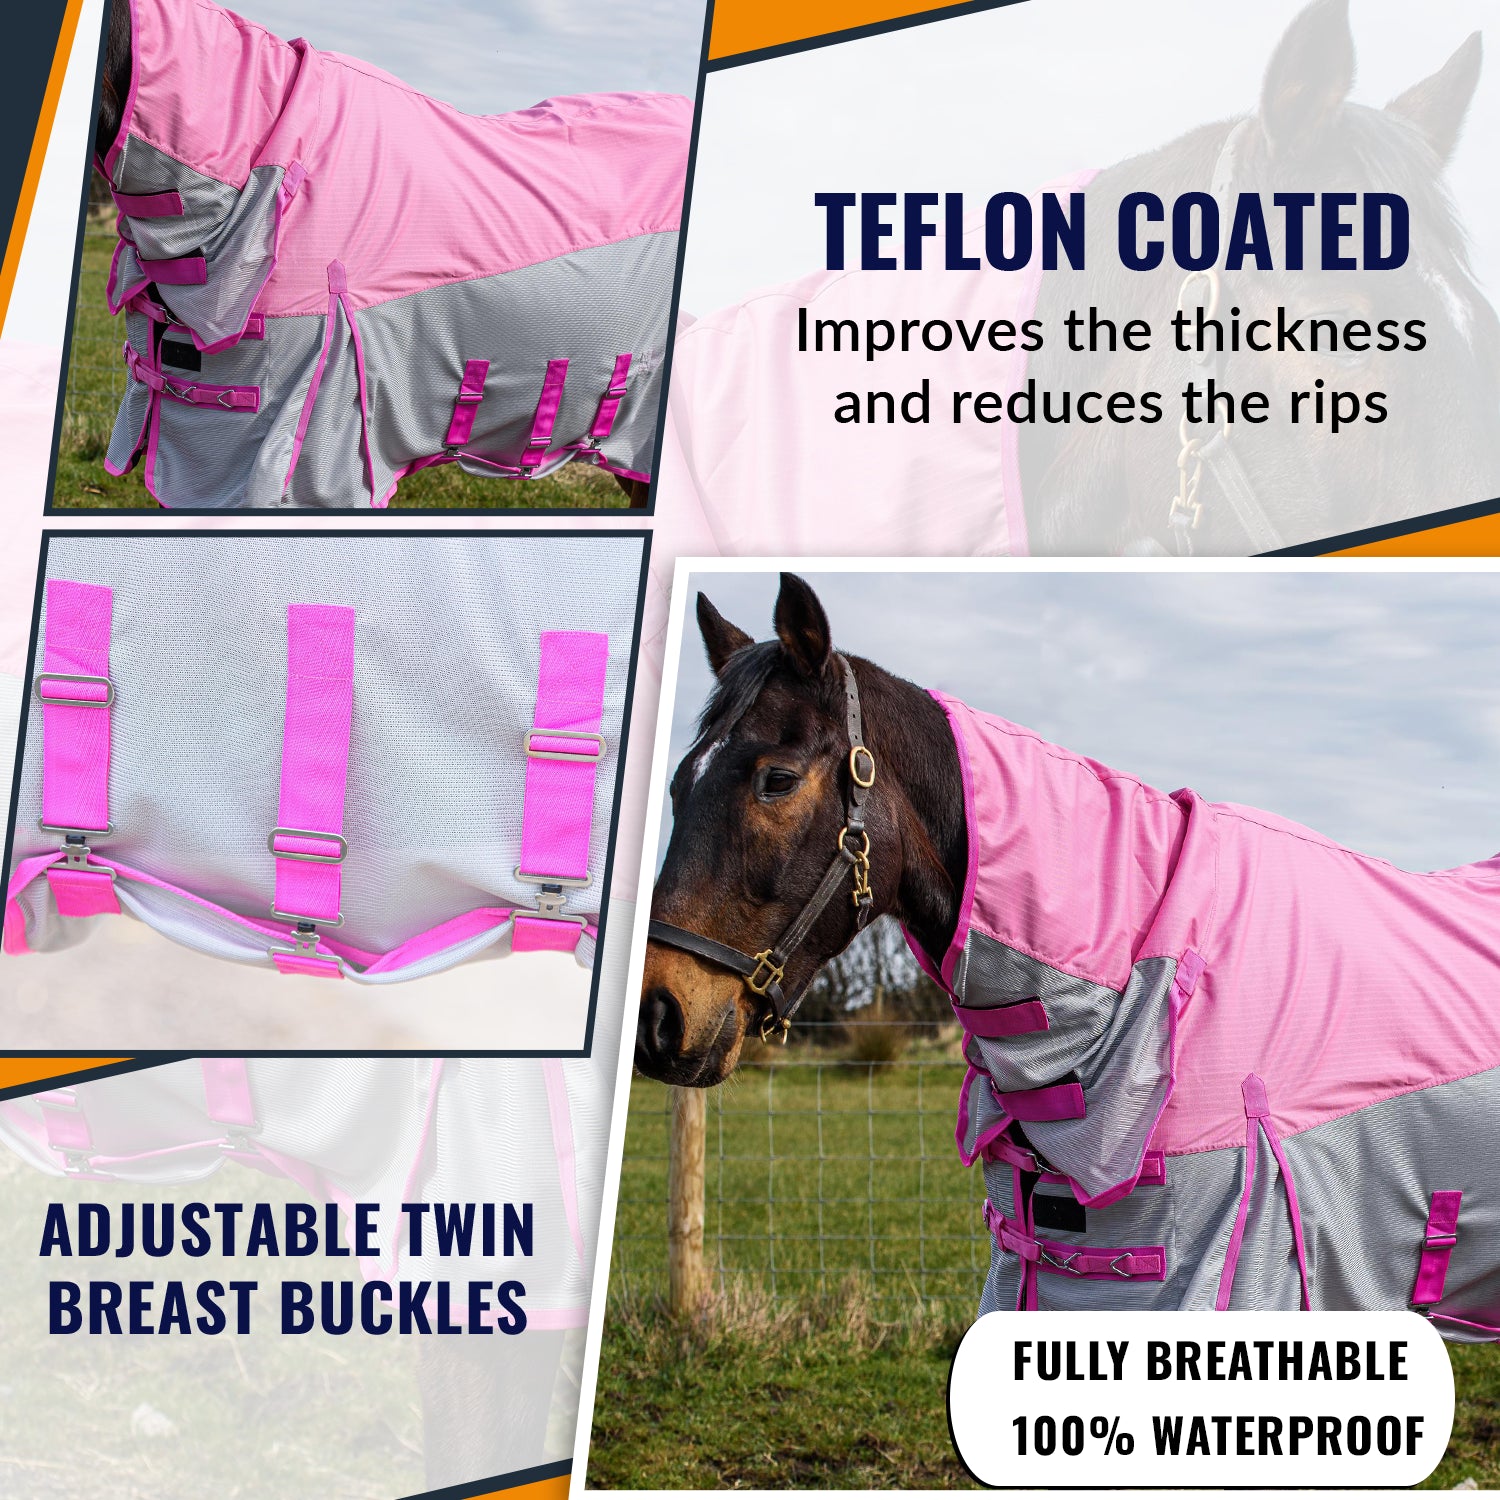 600D 2 in 1 Waterproof Fly Turnout Mesh Horse Rug Fixed Neck Pink/Silver 5'6-6'9 - Tack24